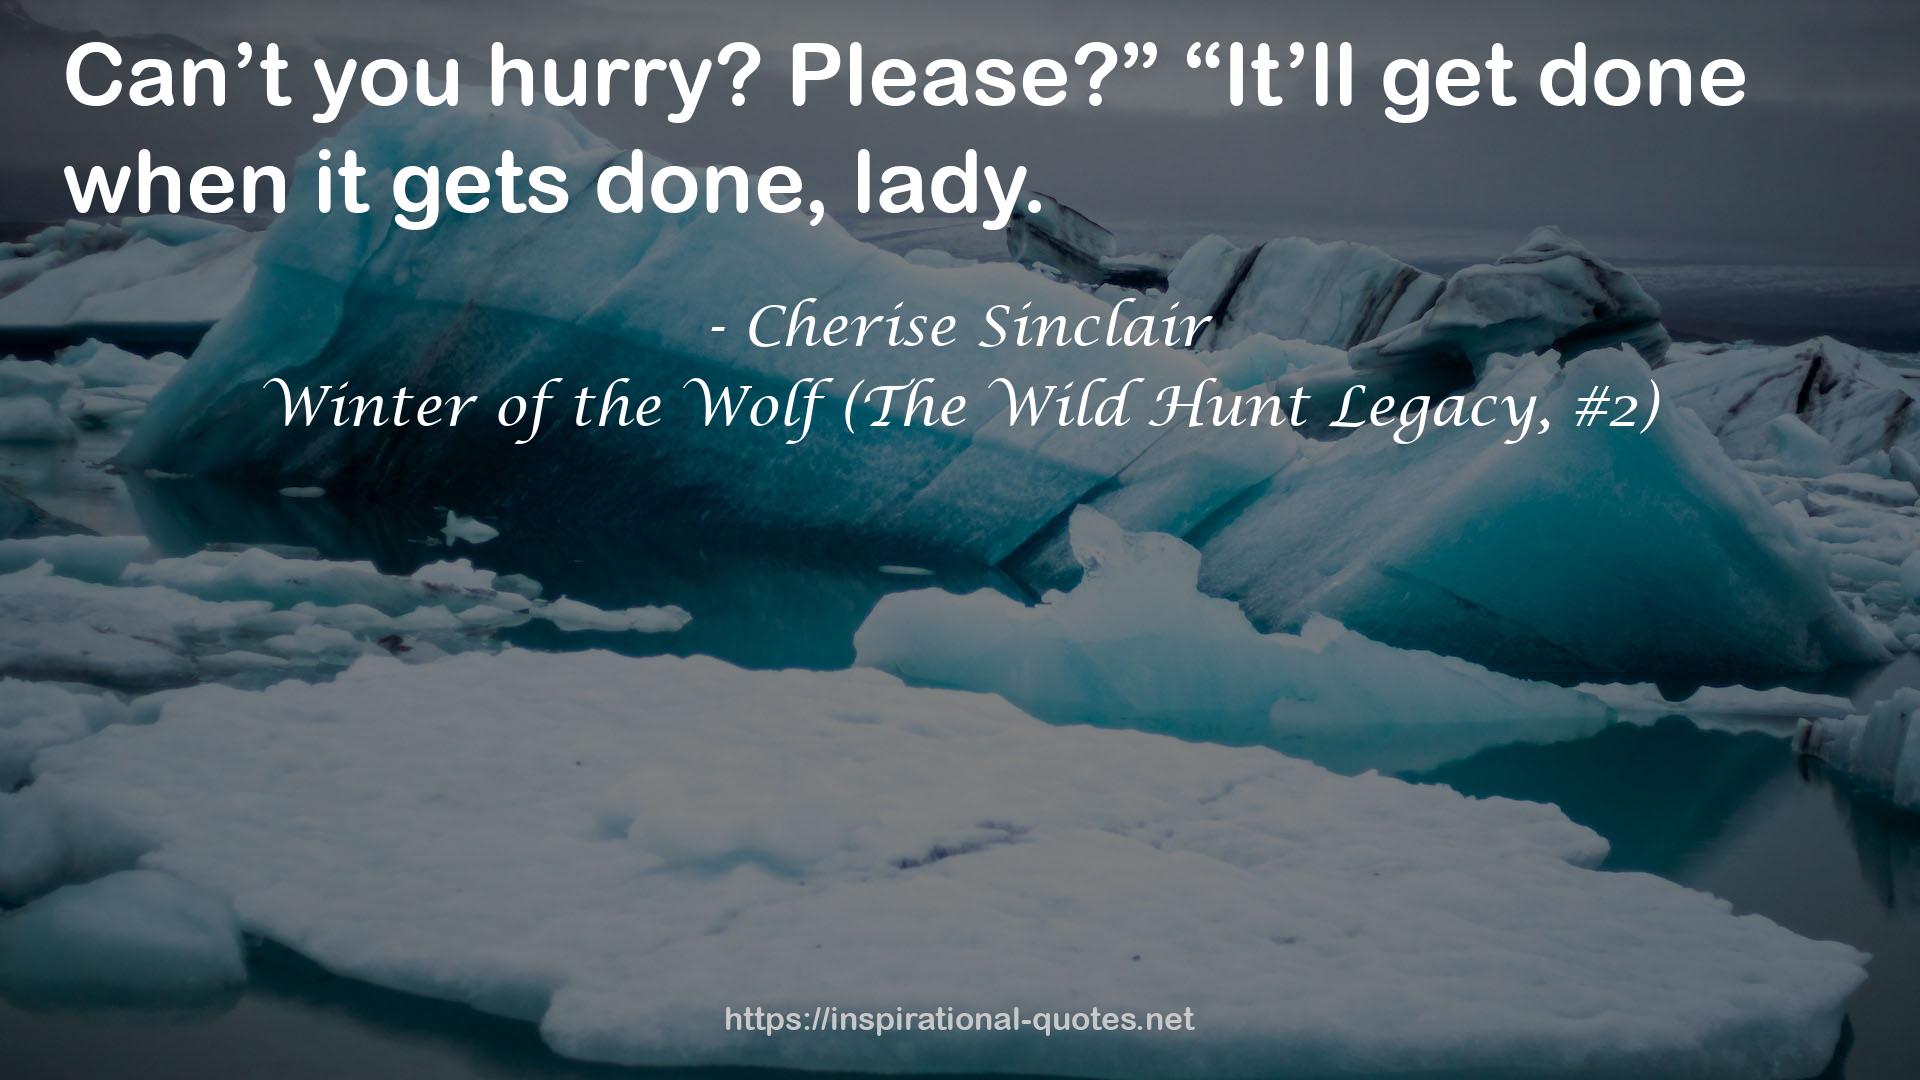 Winter of the Wolf (The Wild Hunt Legacy, #2) QUOTES